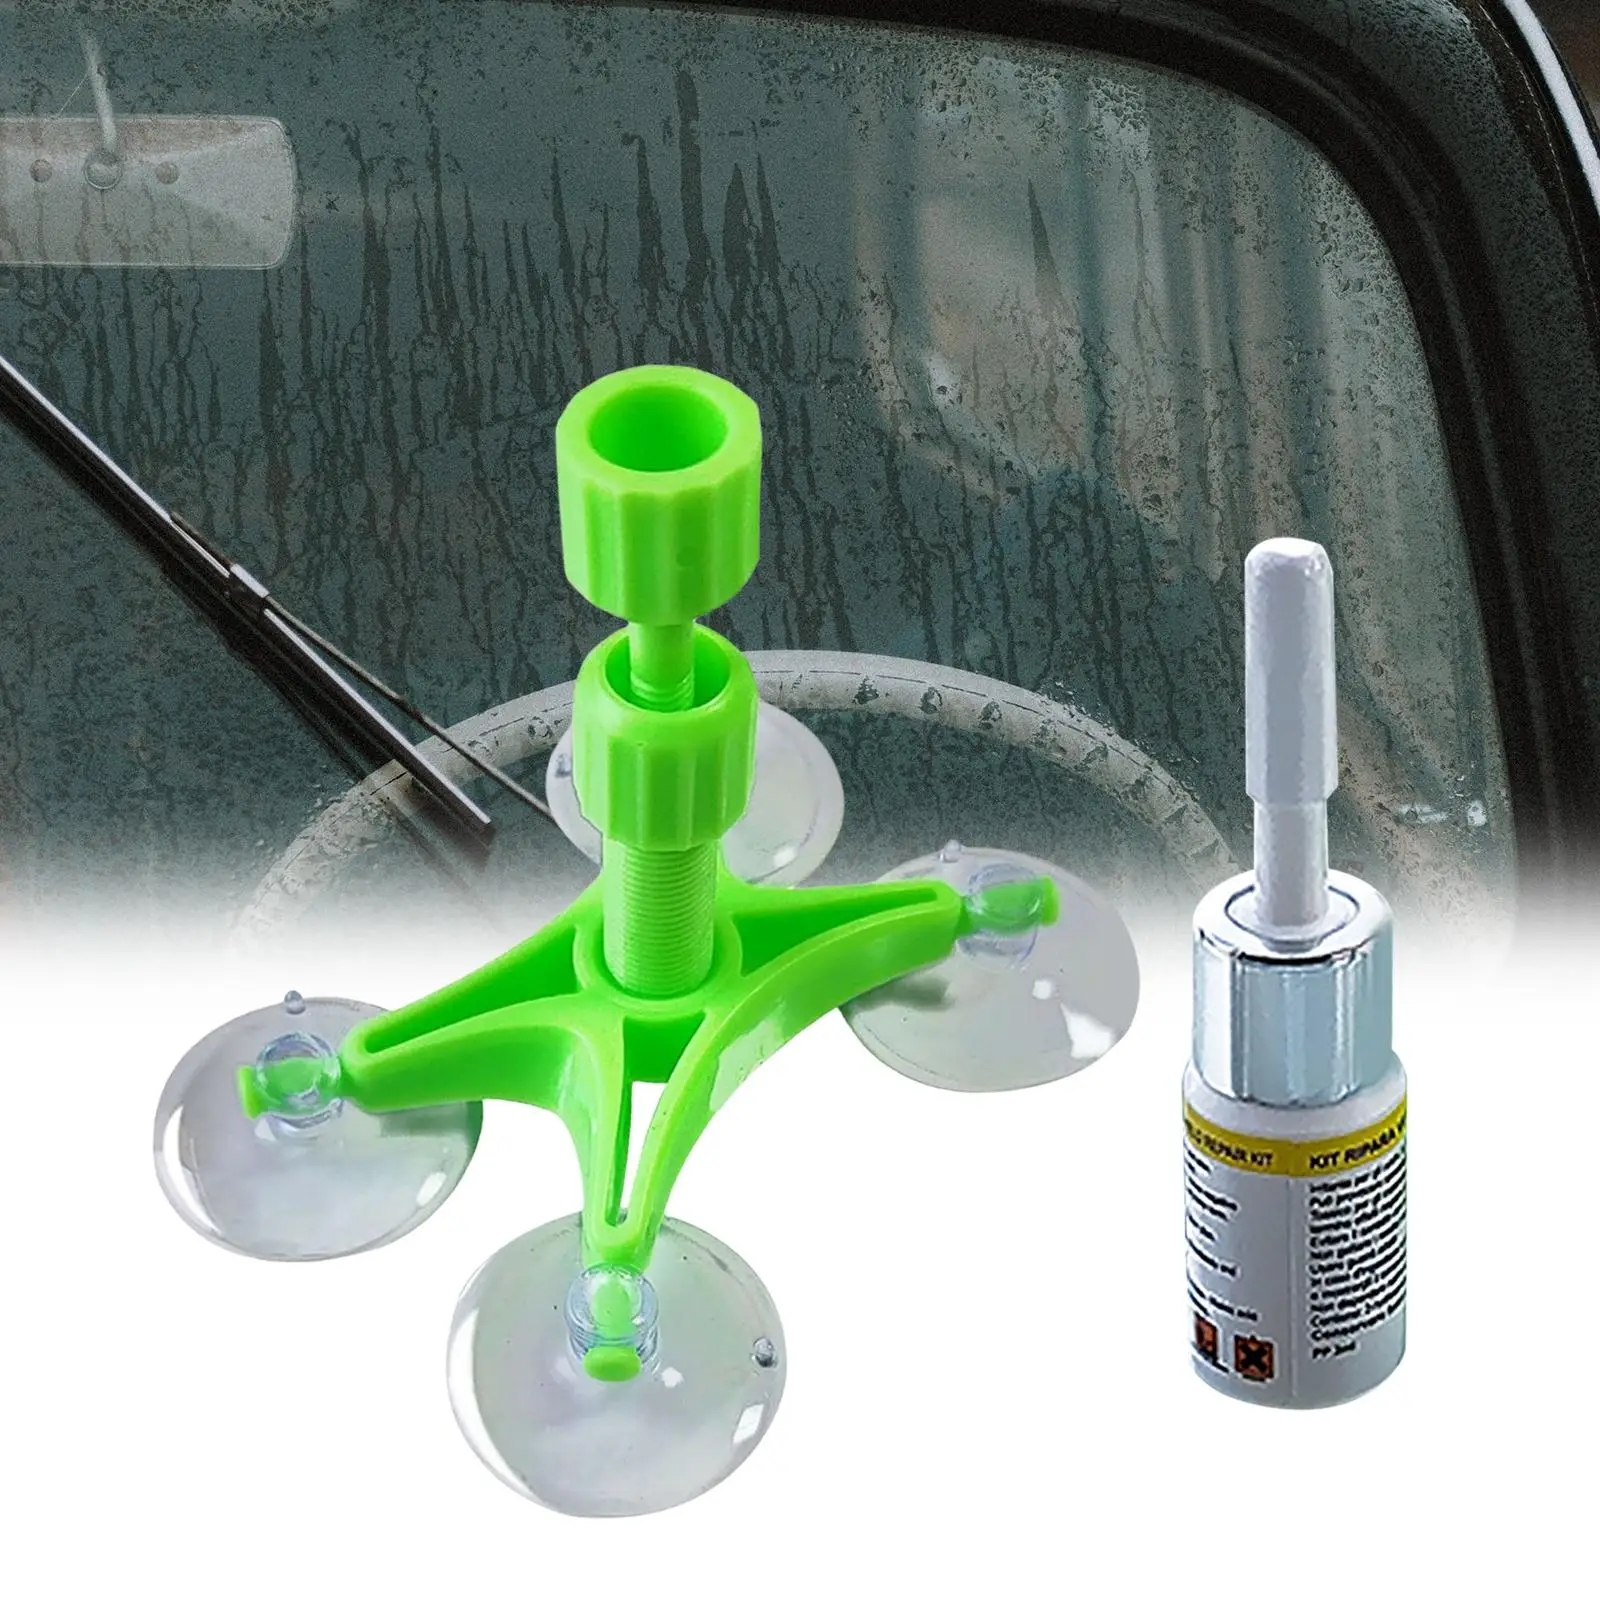 Automotive Windshield Crack Repairing Kit Professional for Chips and Cracks